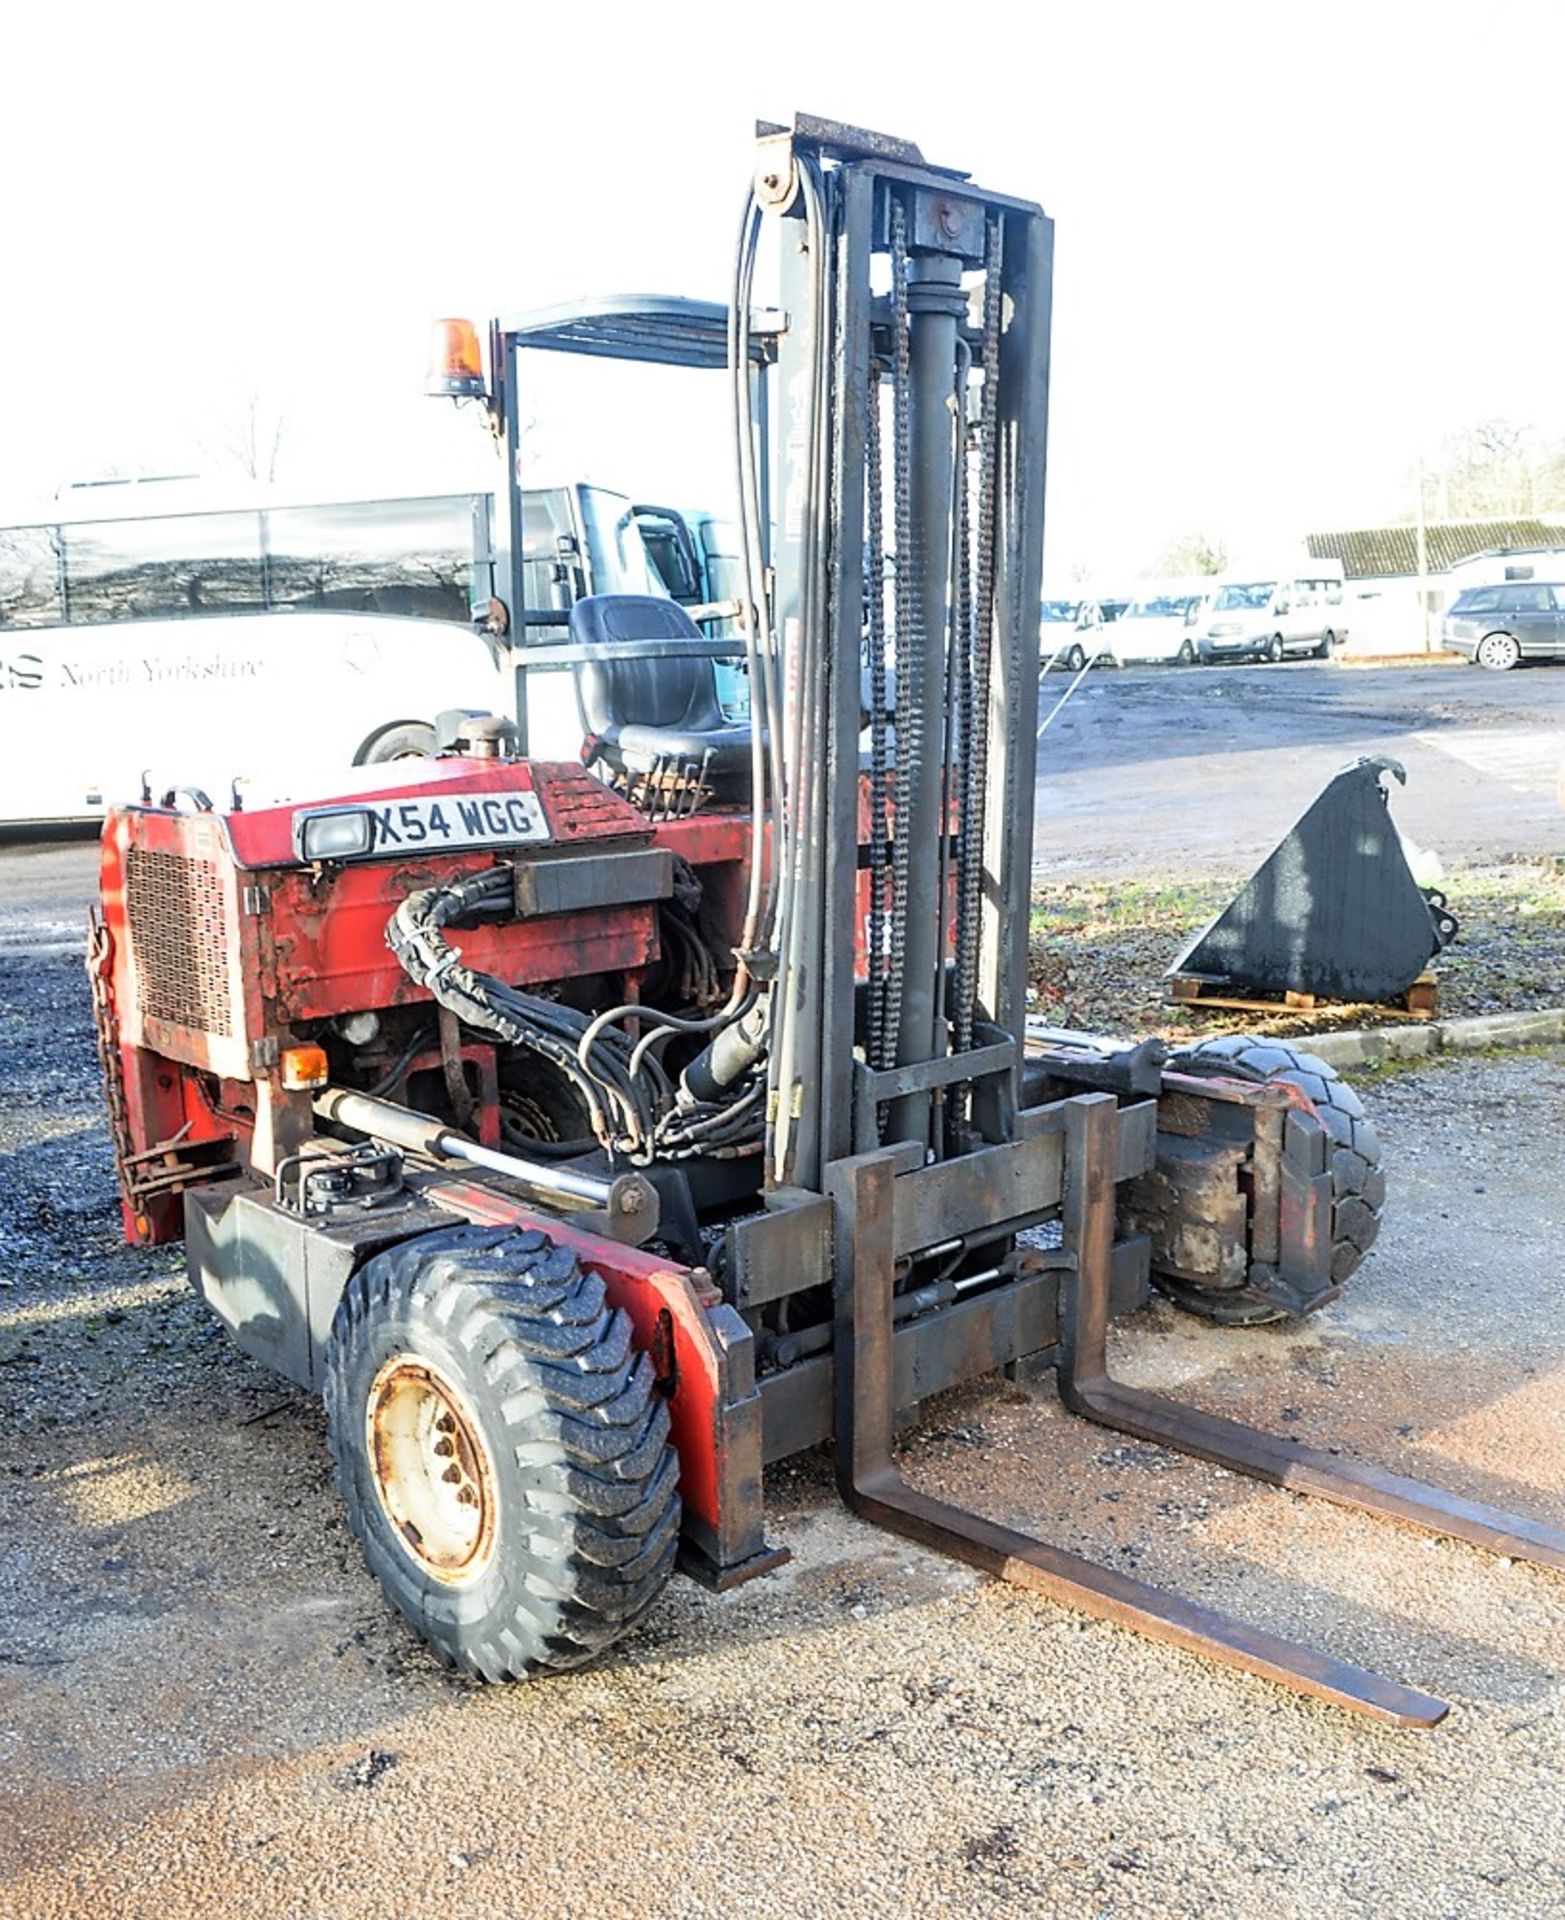 Moffet M5 20.3 diesel driven truck mountable fork lift truck Year: 2005 S/N: E030205 Recorded Hours: - Image 2 of 6